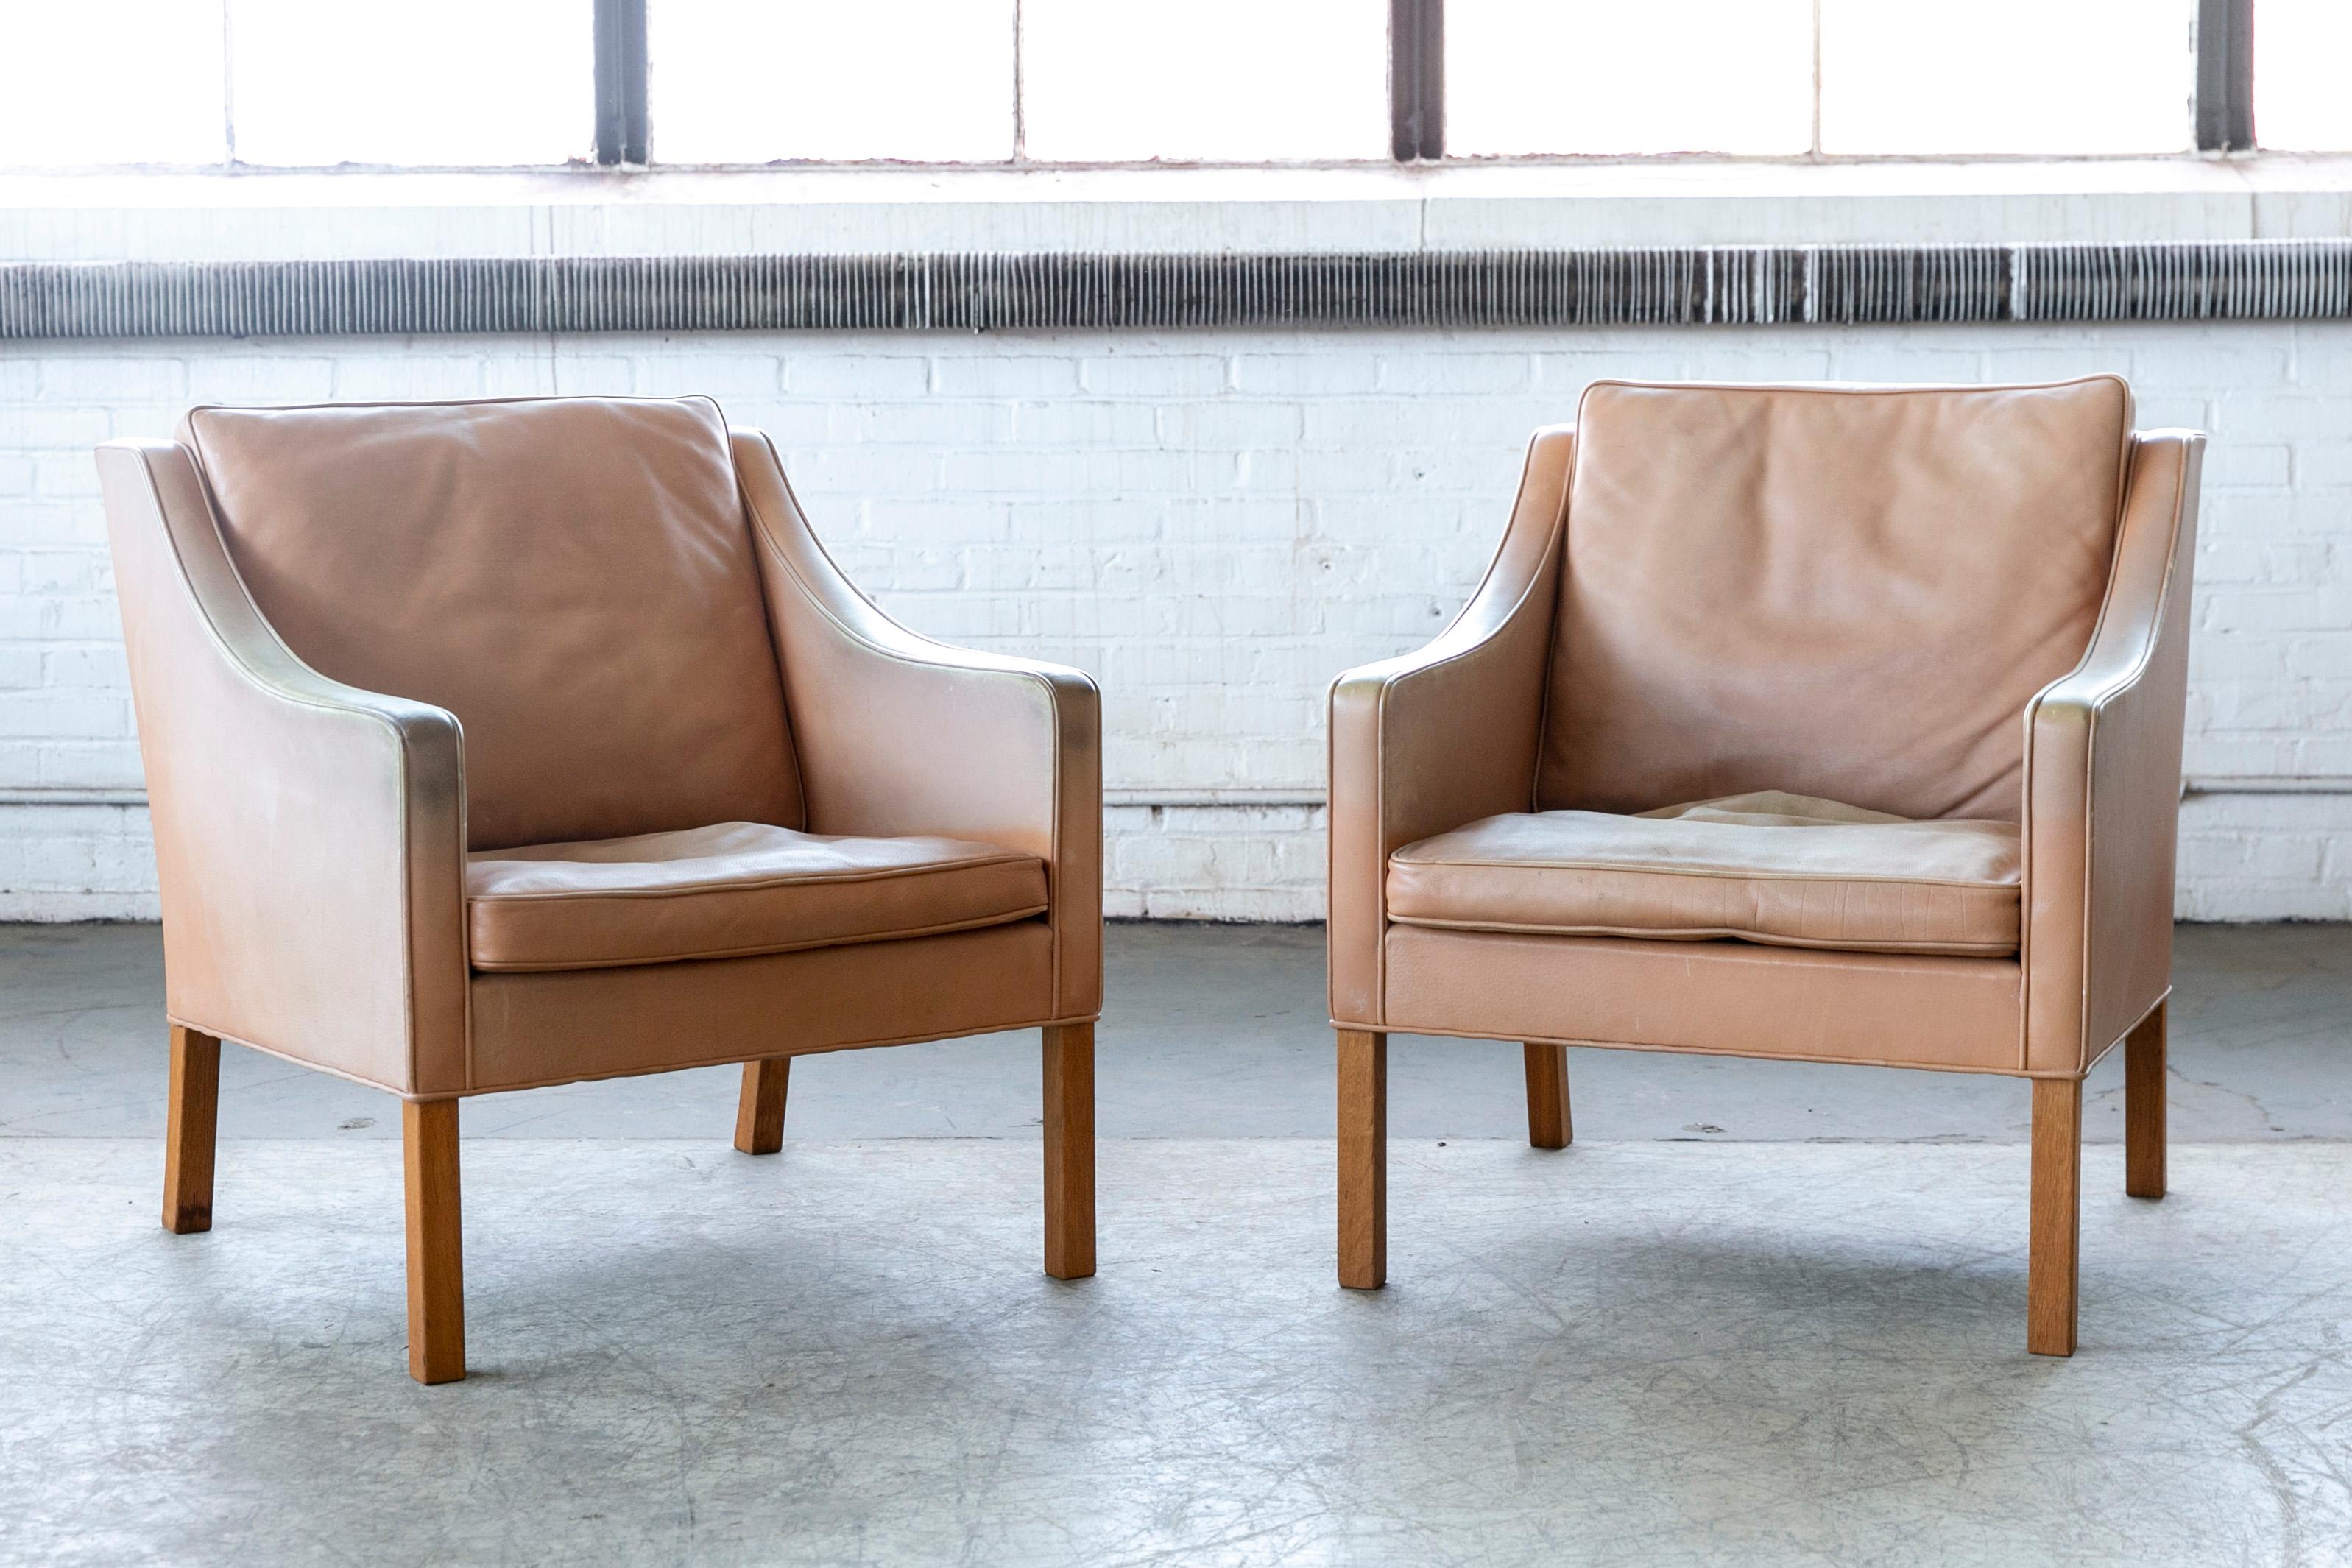 Stunning Børge Mogensen designed lounge chairs model 2207 for Fredericia. One of the most elegant Classic midcentury Danish lounge chairs ever made of a design that will just never go out of style. Supple beige aniline leather with down-filled